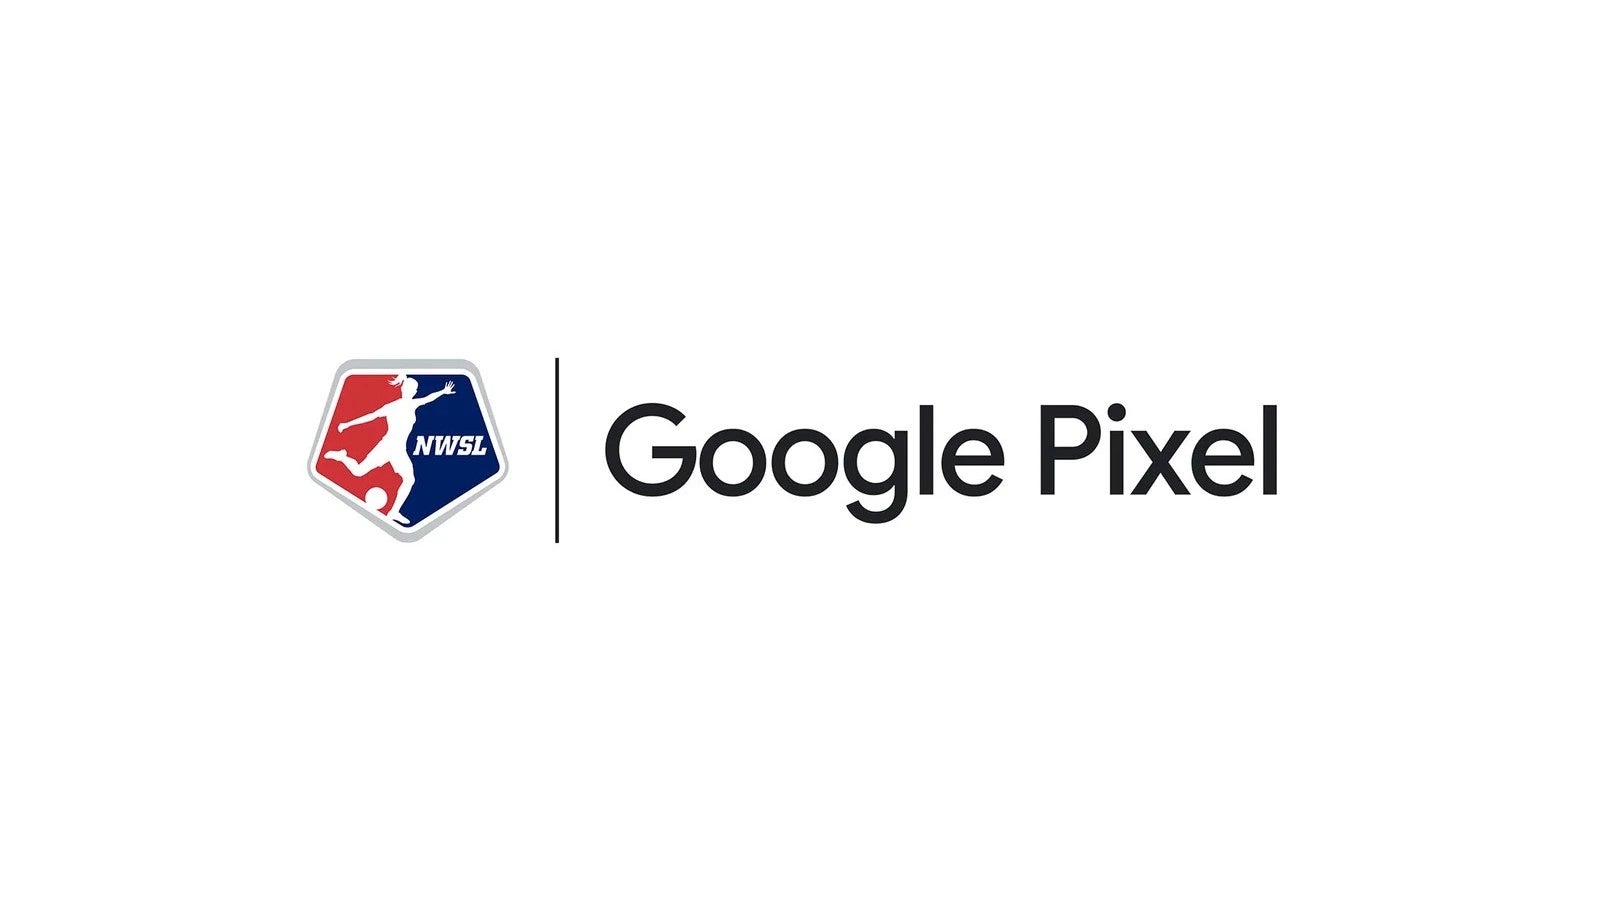 Pixel takes the field Google Pixel scores partnership with NWSL